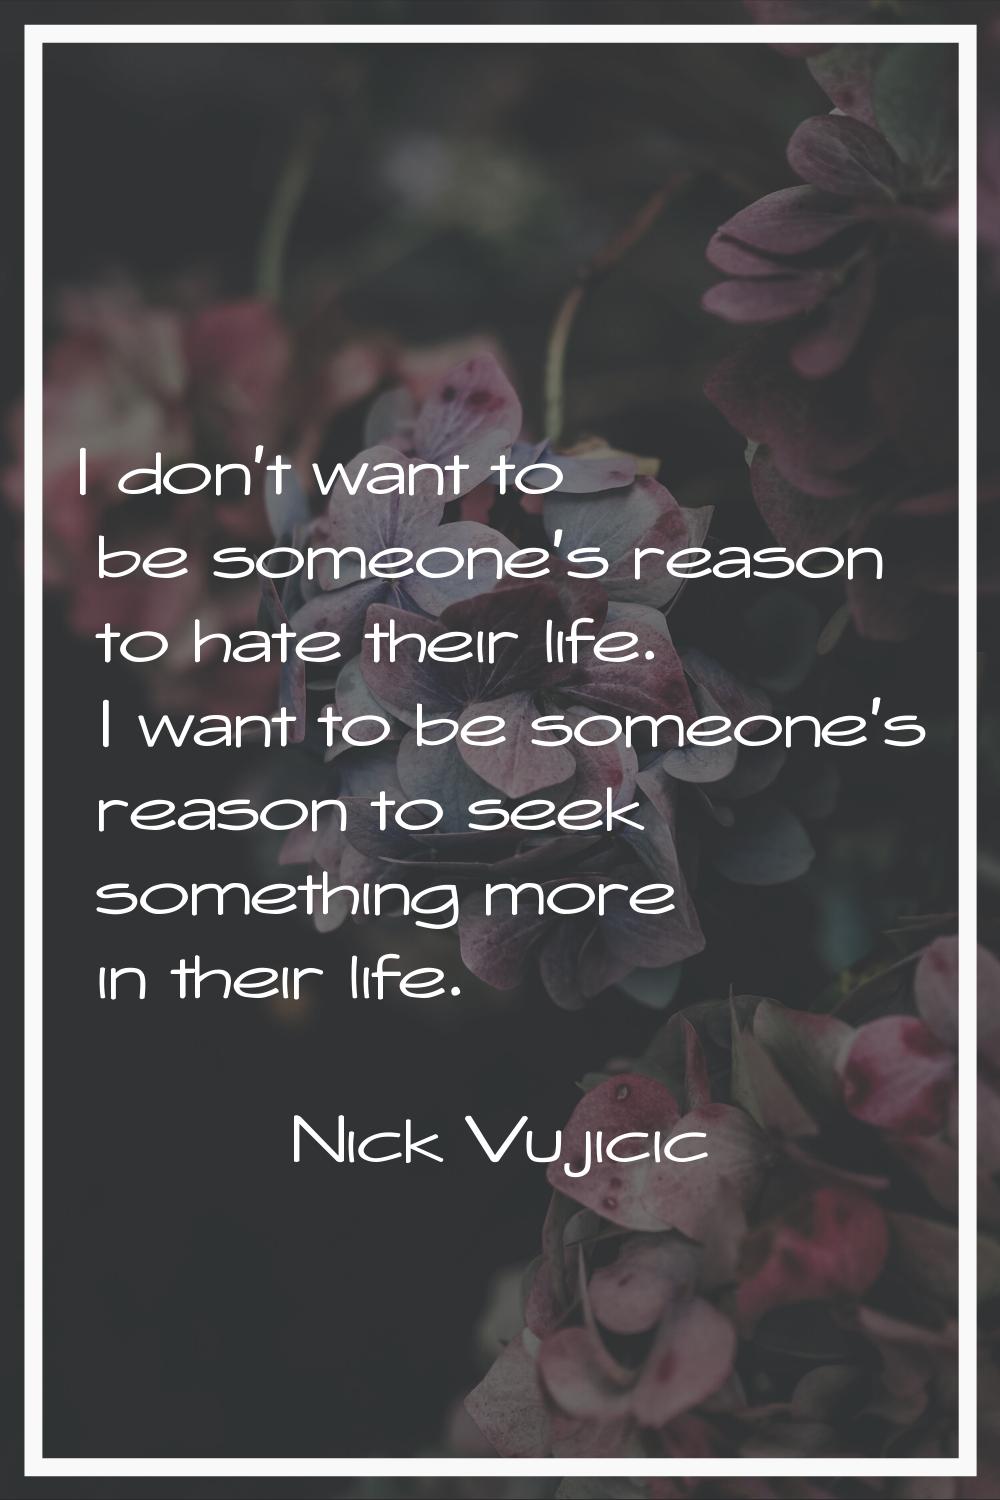 I don't want to be someone's reason to hate their life. I want to be someone's reason to seek somet